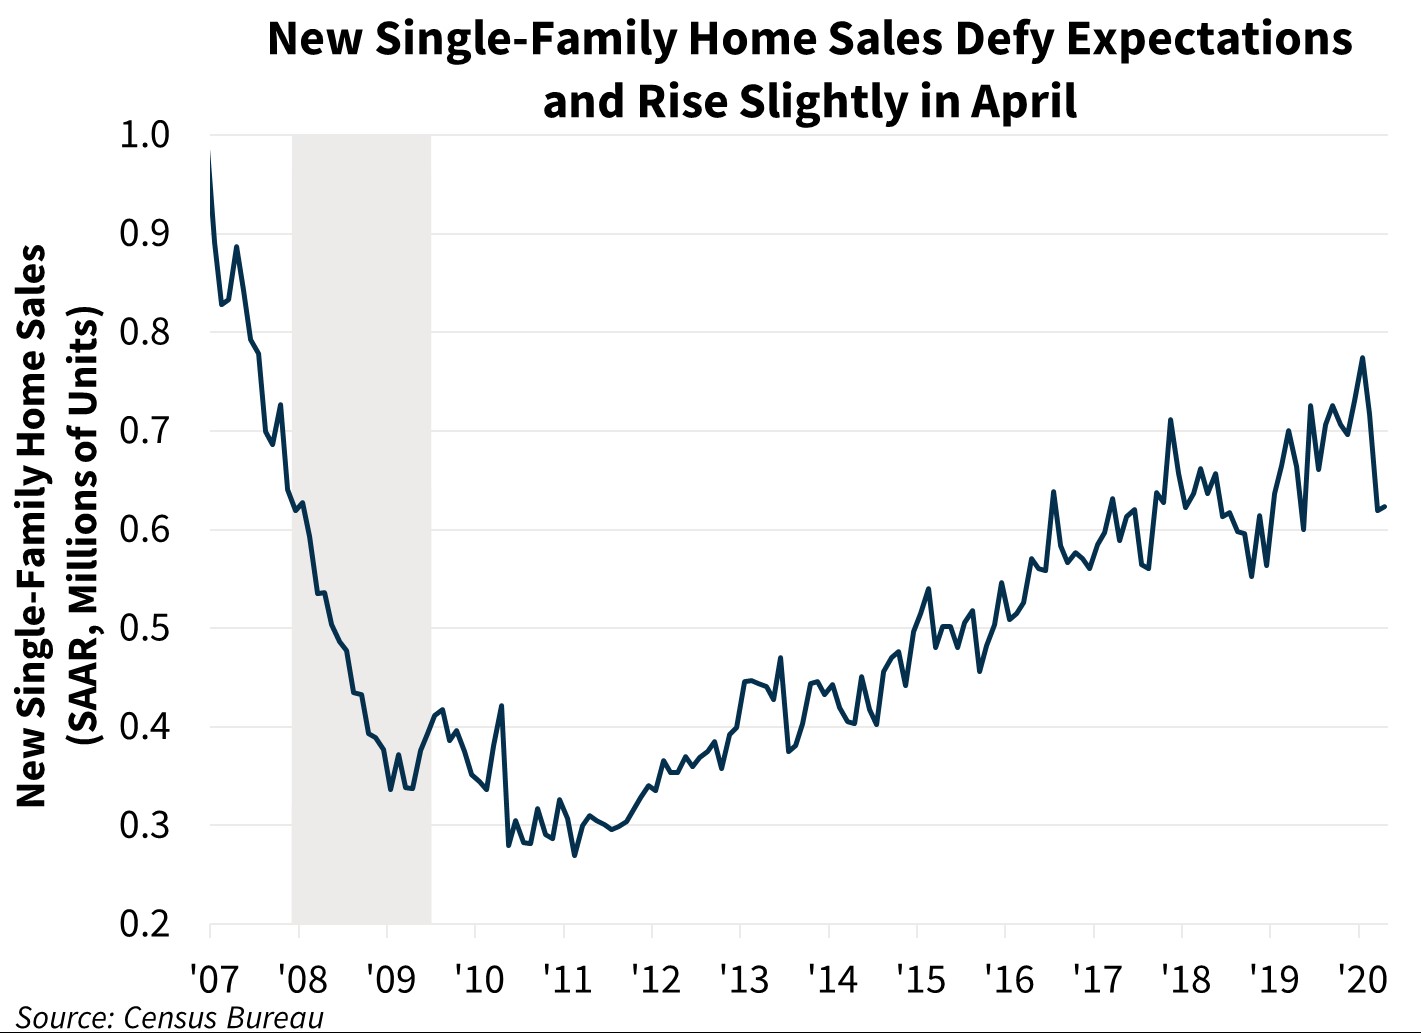 New Single-Family Home Sales Defy Expectations and Rise Slightly in April